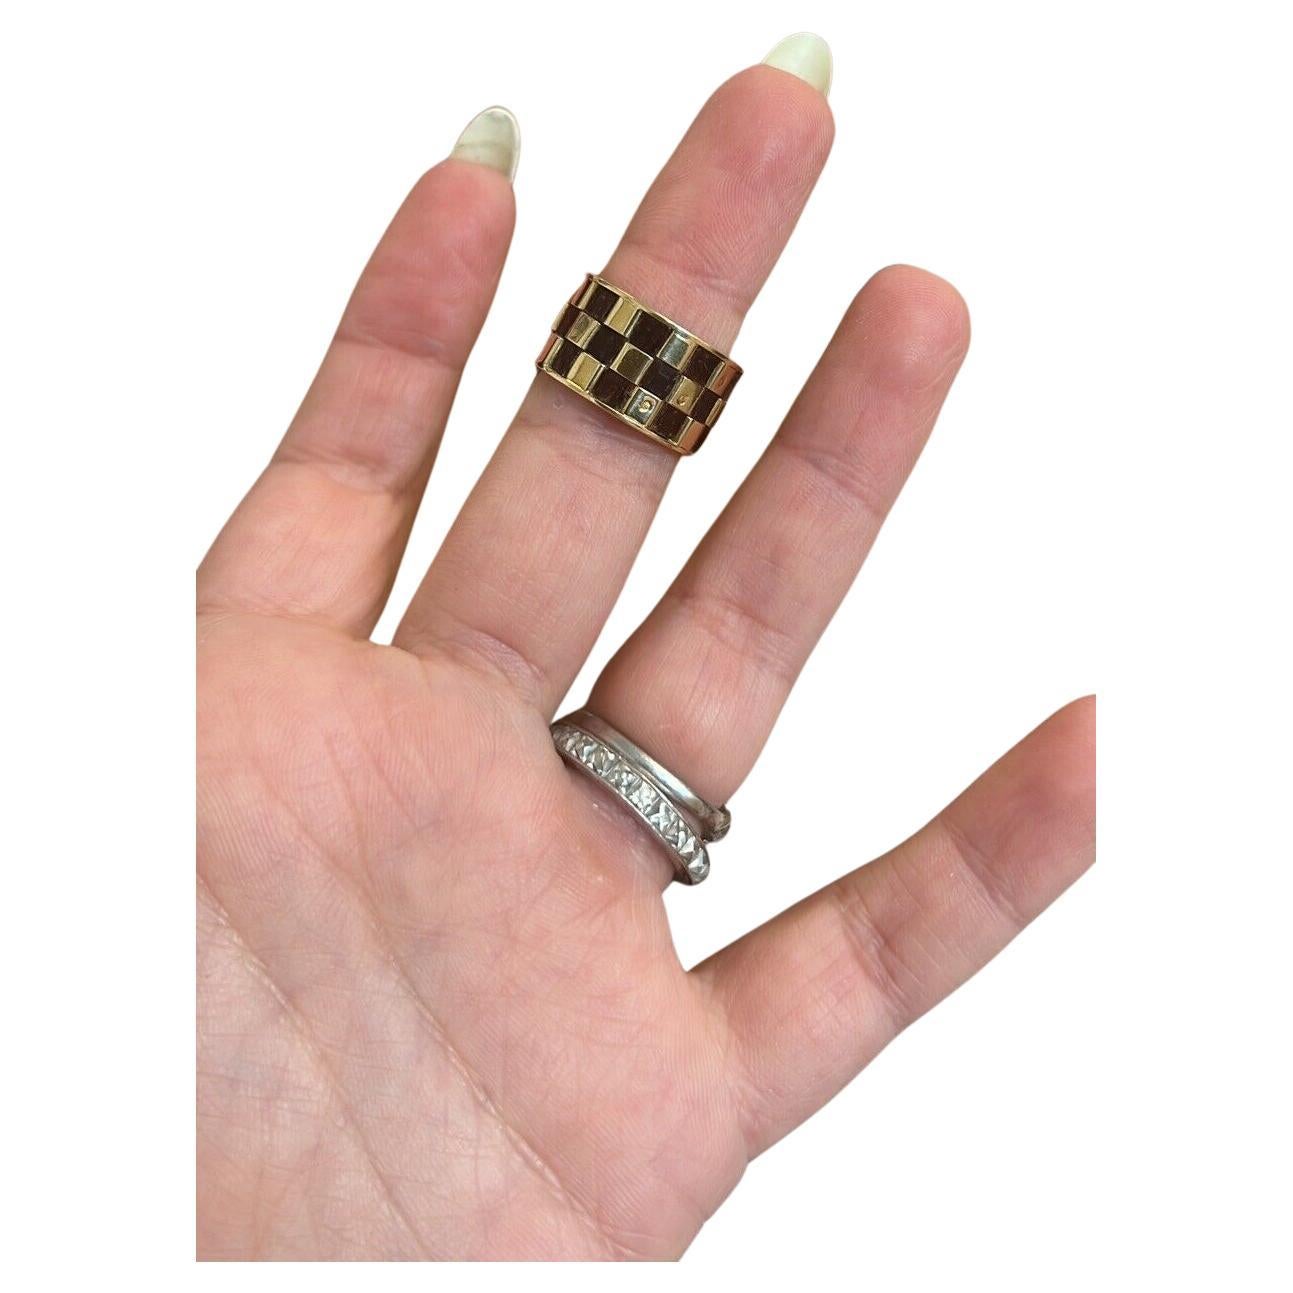 Van Cleef & Arpels Paris 18k Yellow Gold & Wood Checkerboard Ring circa 1970s For Sale